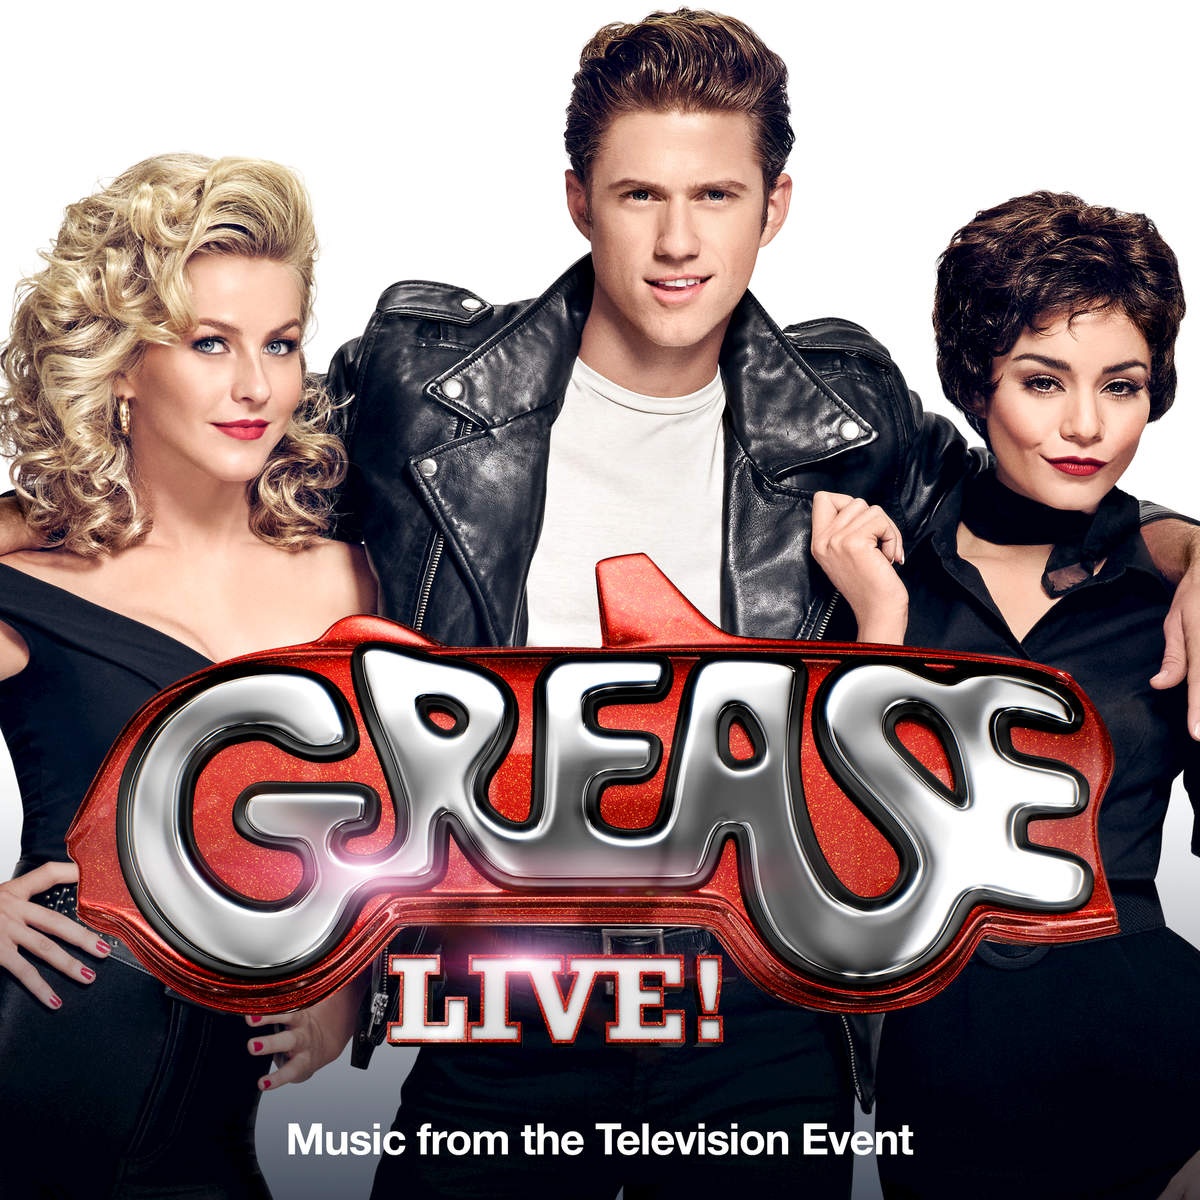 All I Need Is An Angel - From "Grease Live!" Music From The Television Event